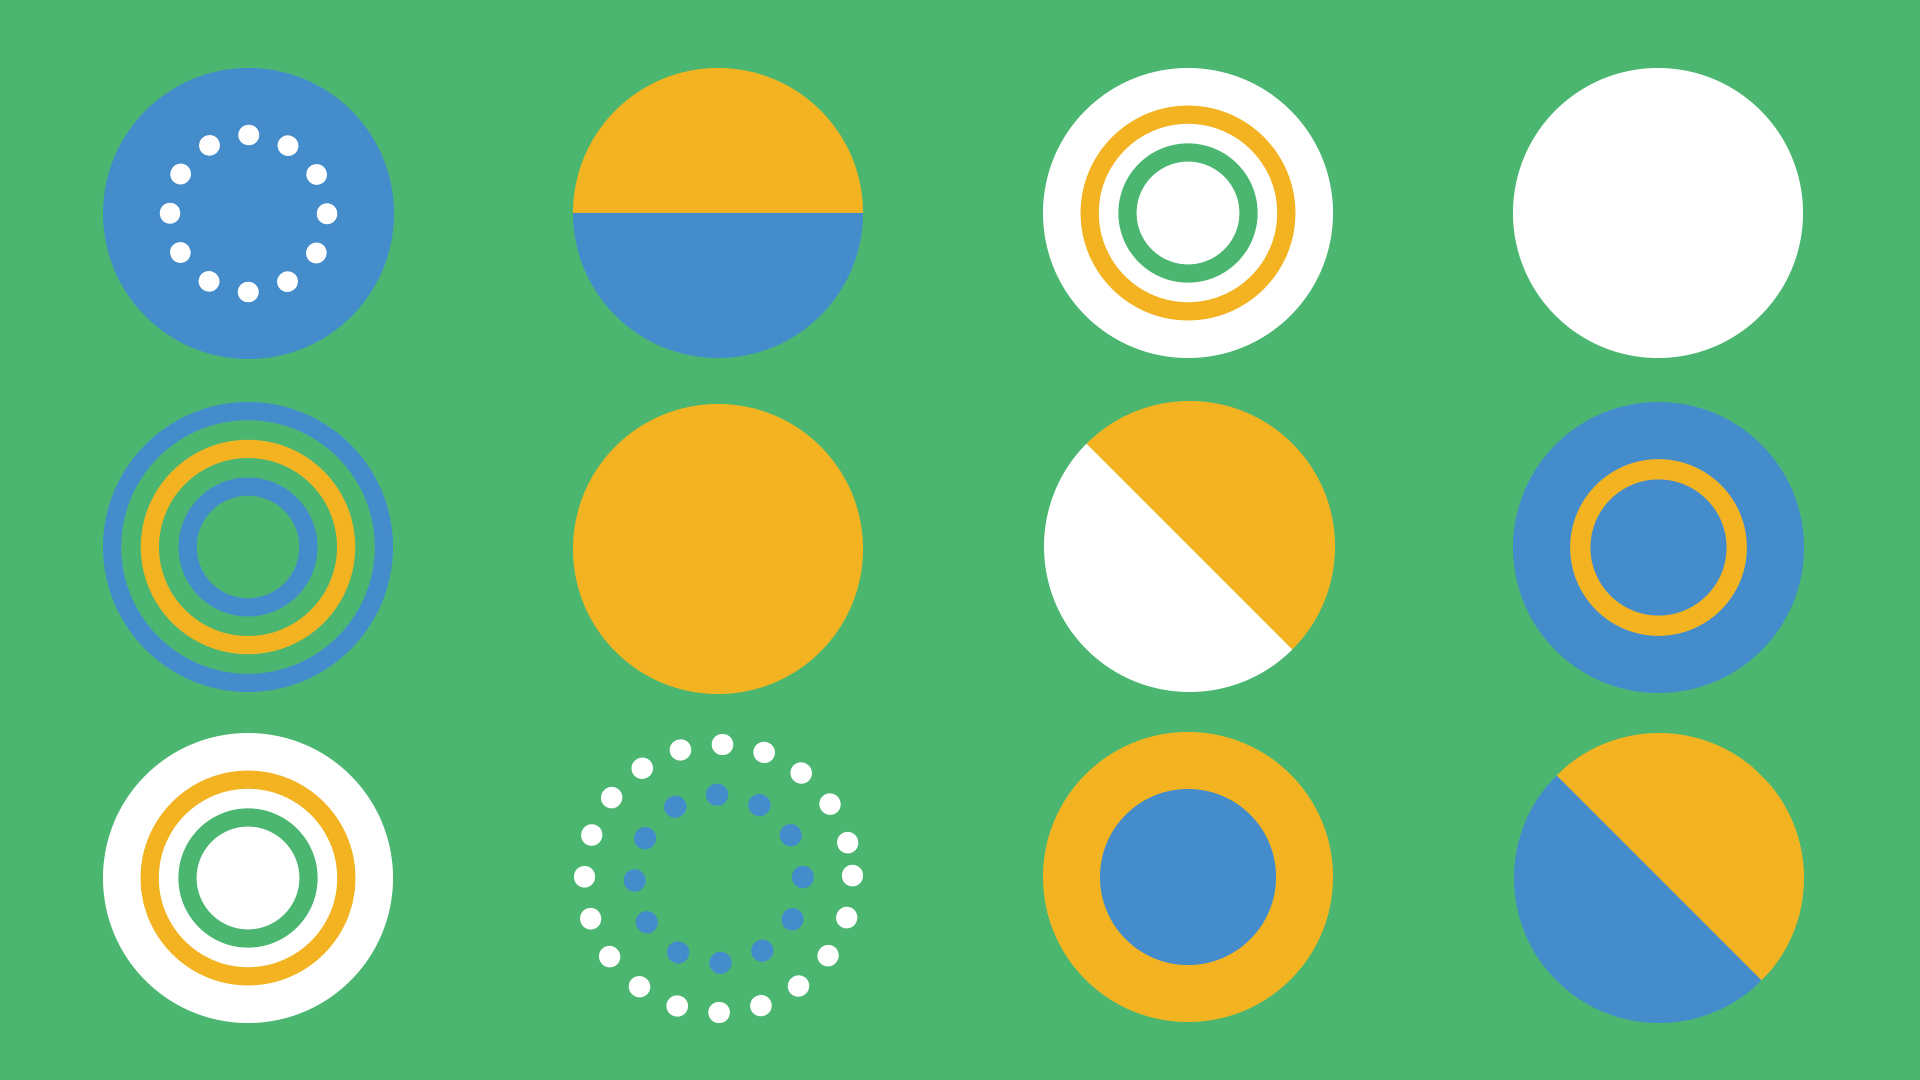 Lawn bowls graphics on green background